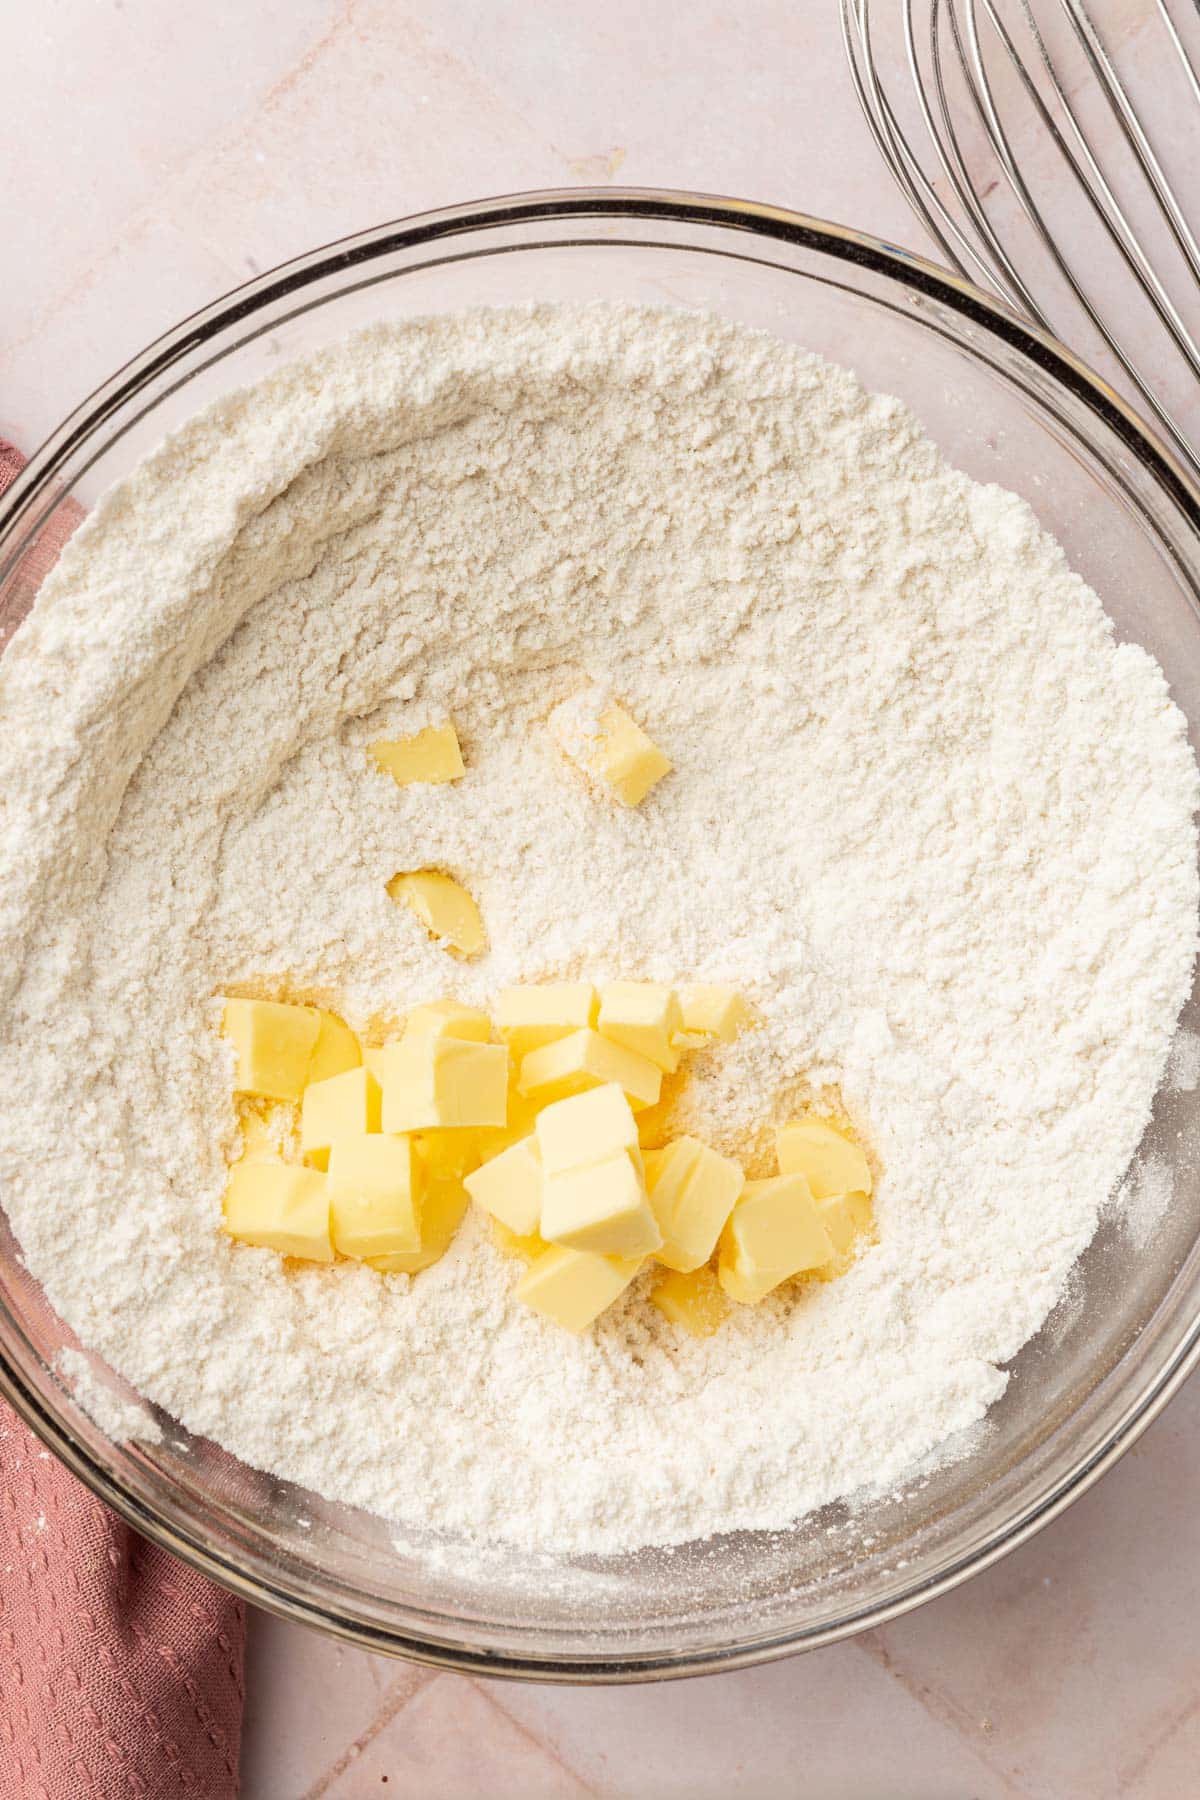 A glass mixing bowl with a gluten-free flour blend topped with small cubes of vegan butter.